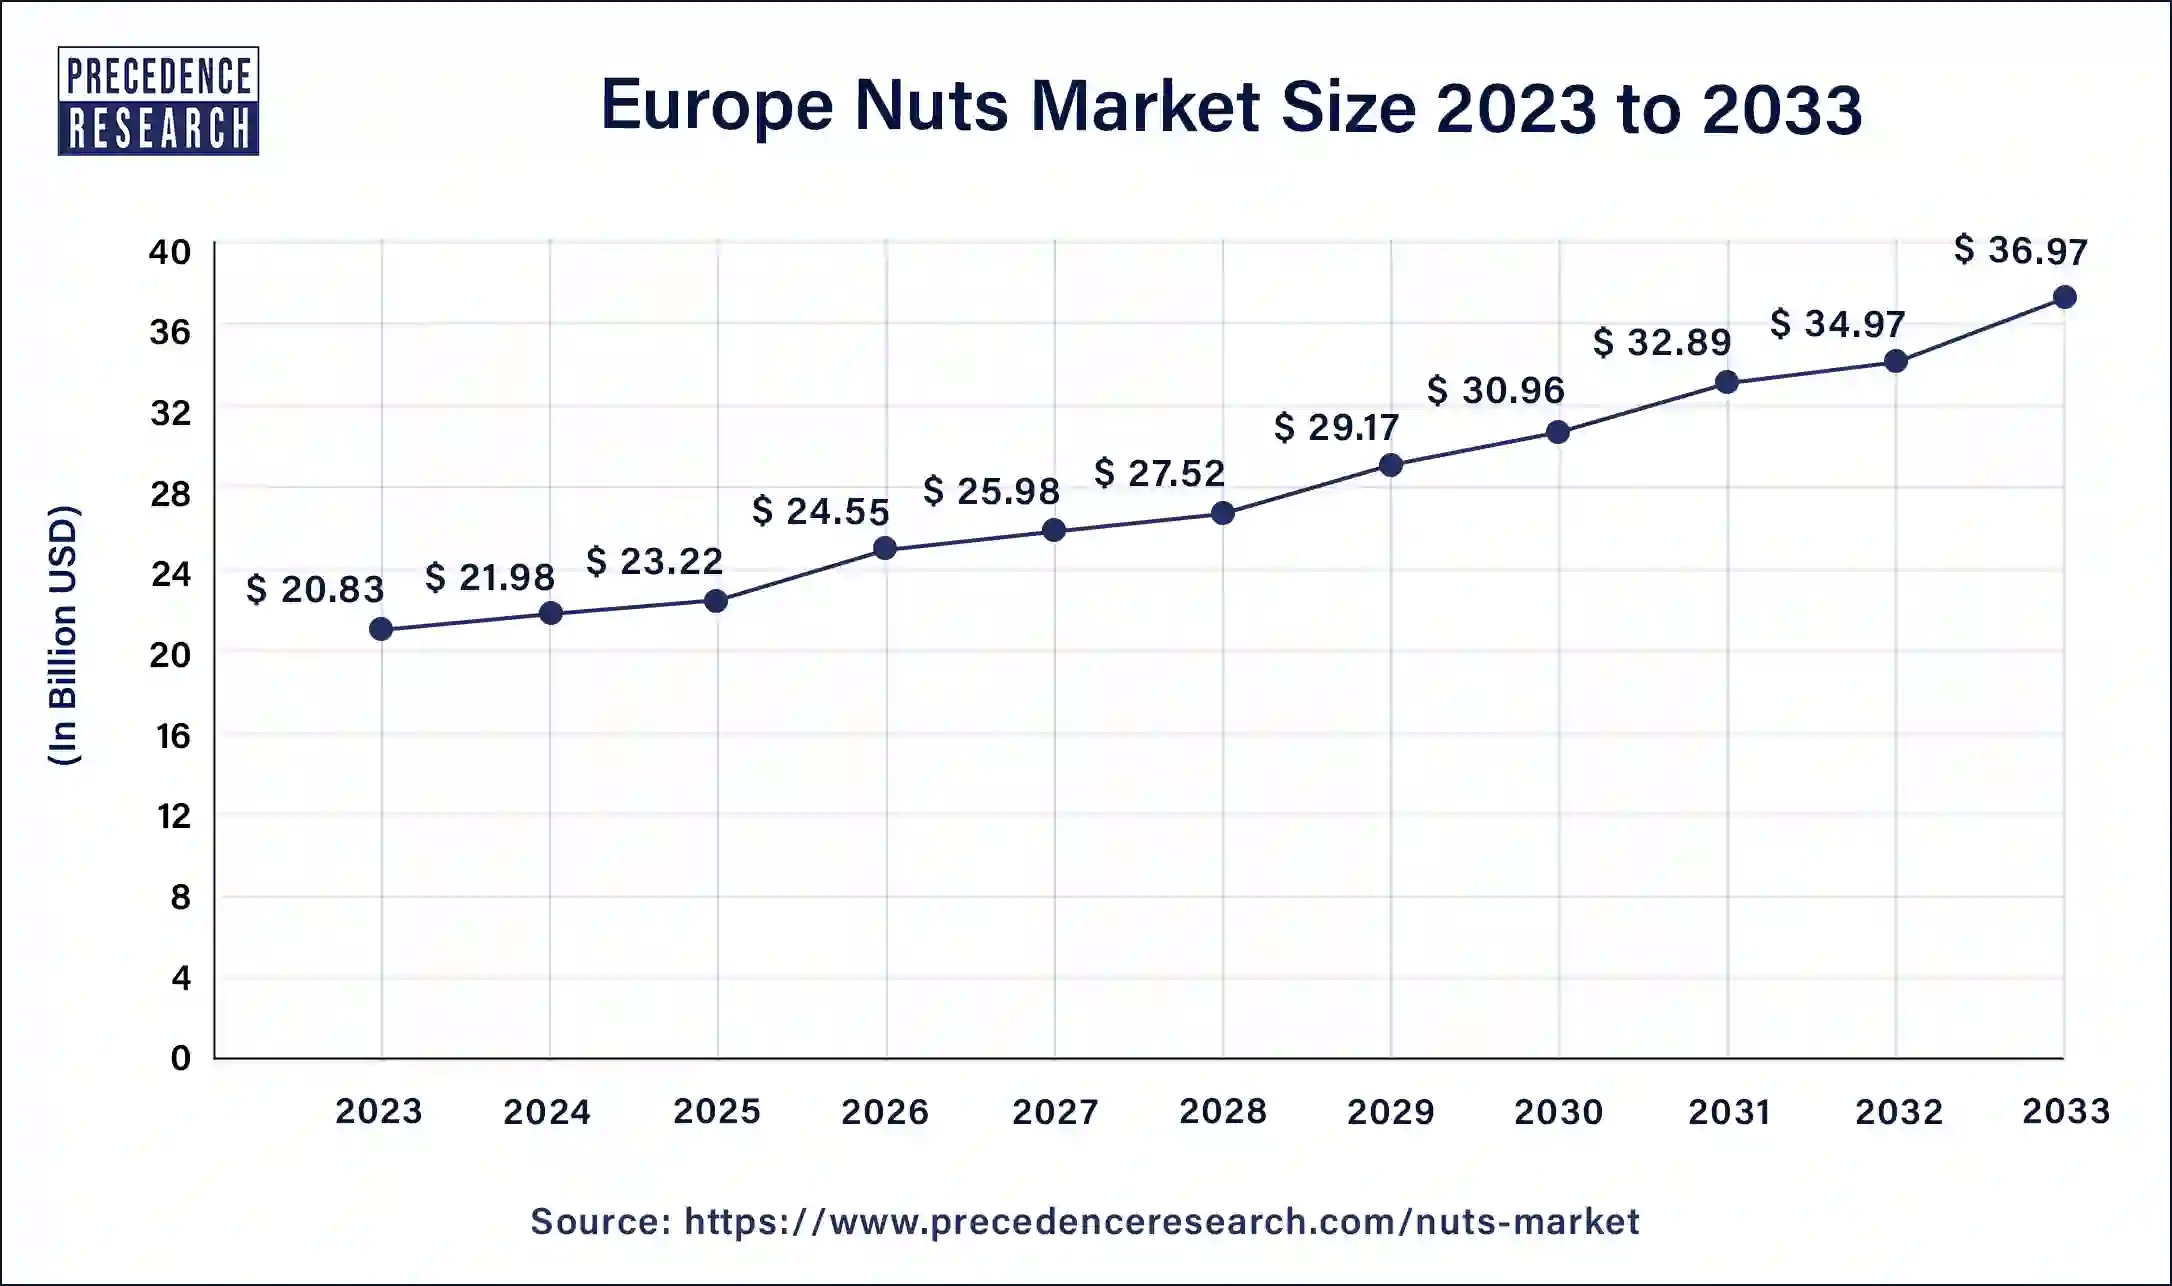 Europe Nuts Market Size 2024 to 2033